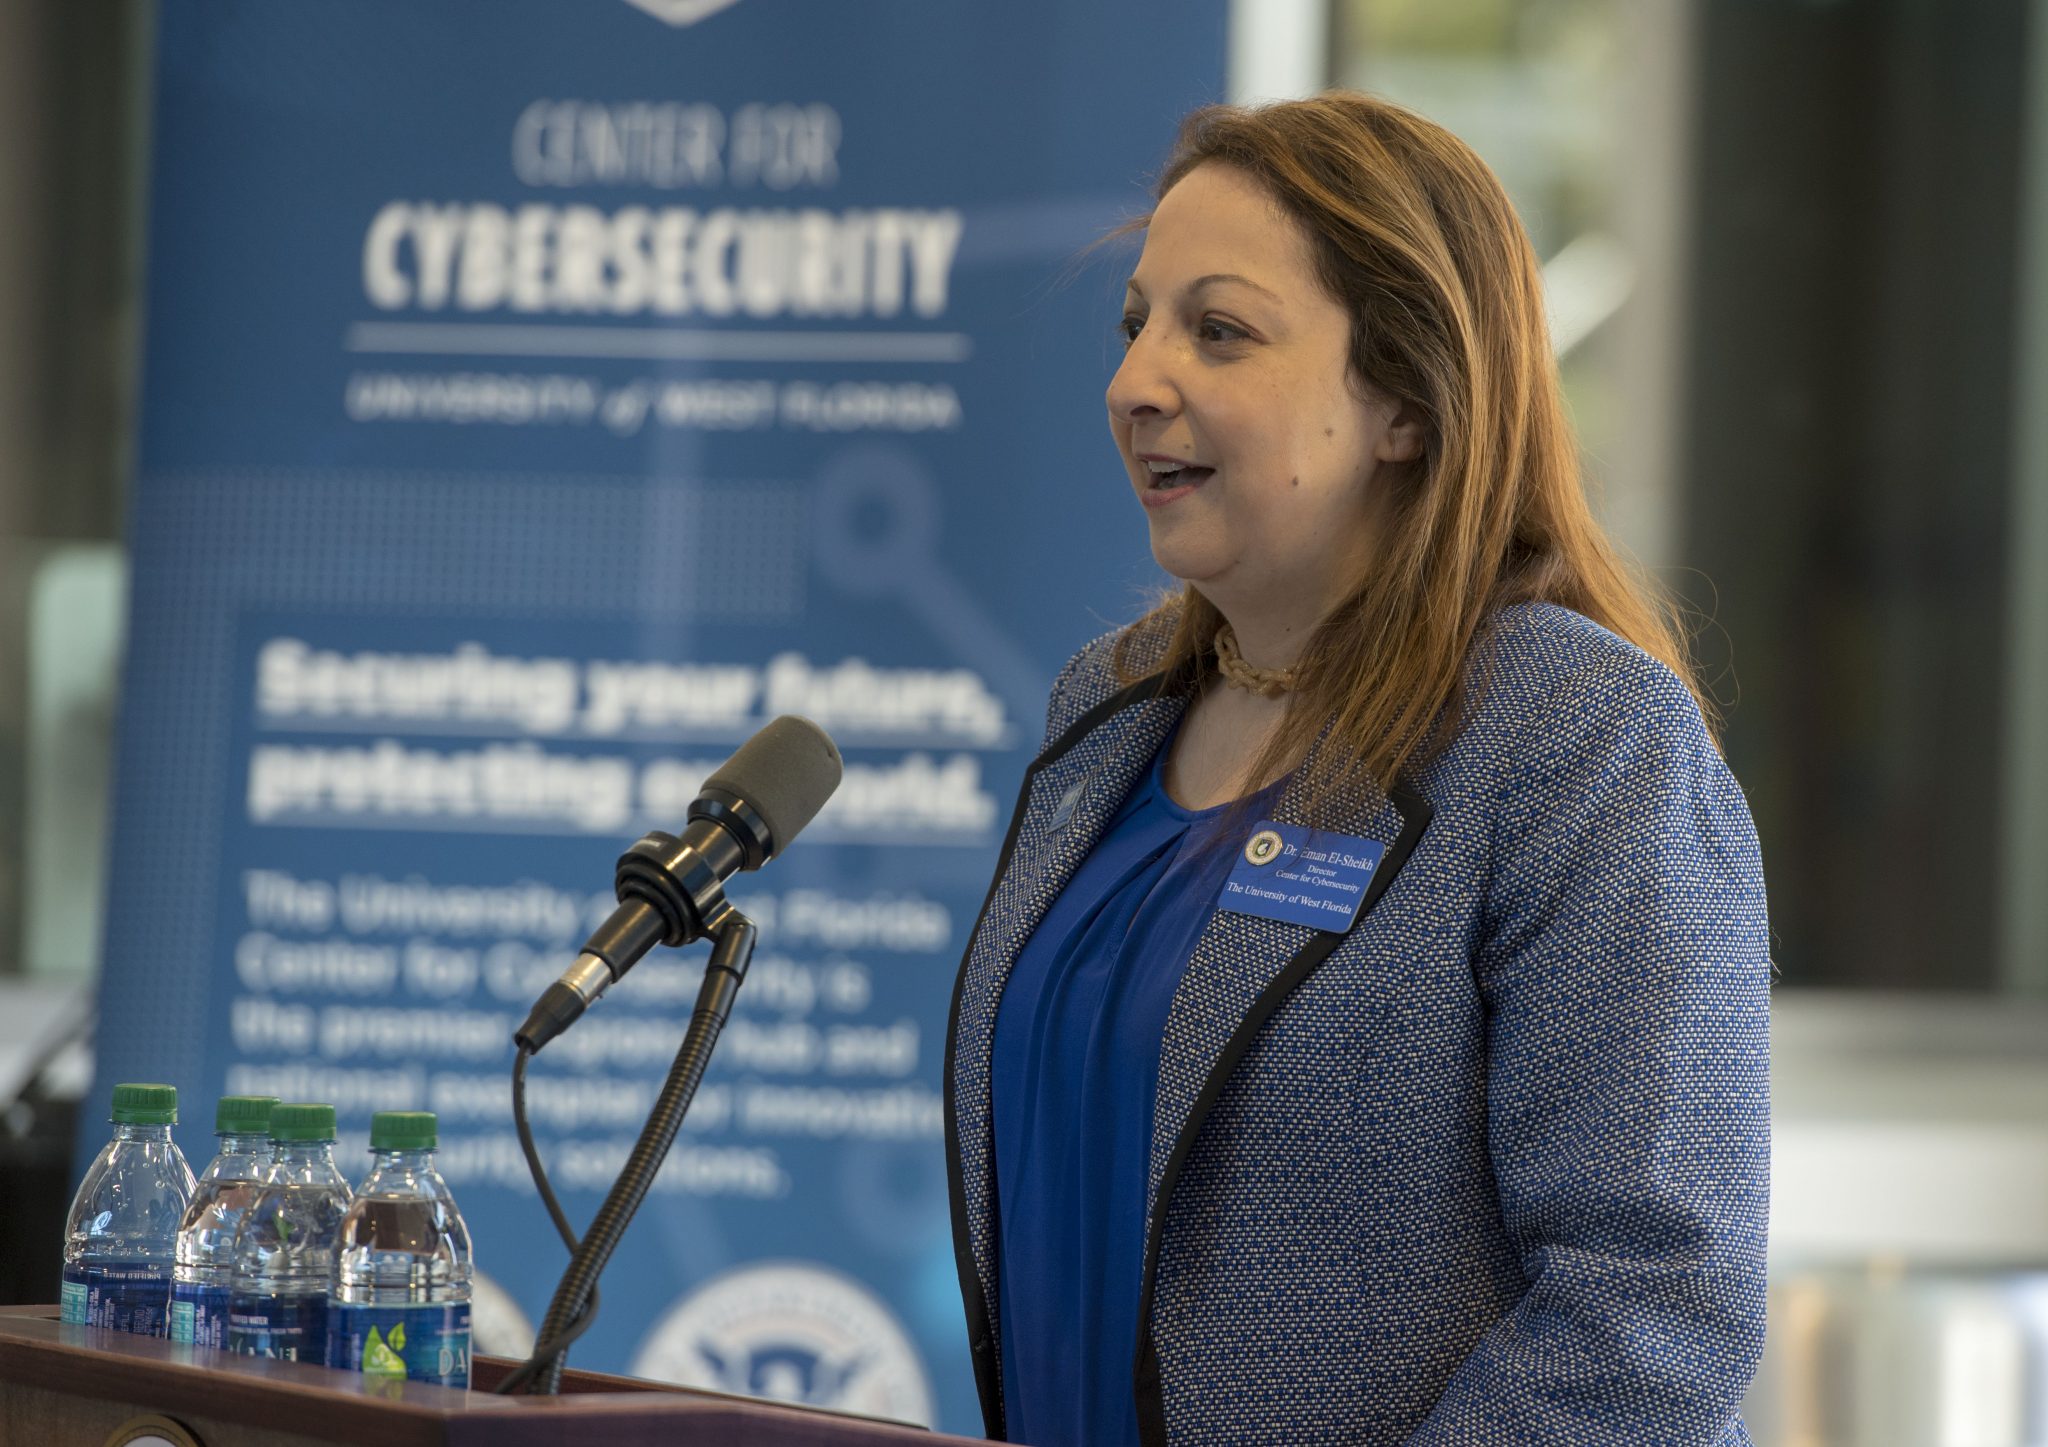 Dr. Eman El-Sheikh at the UWF Center for Cybersecurity